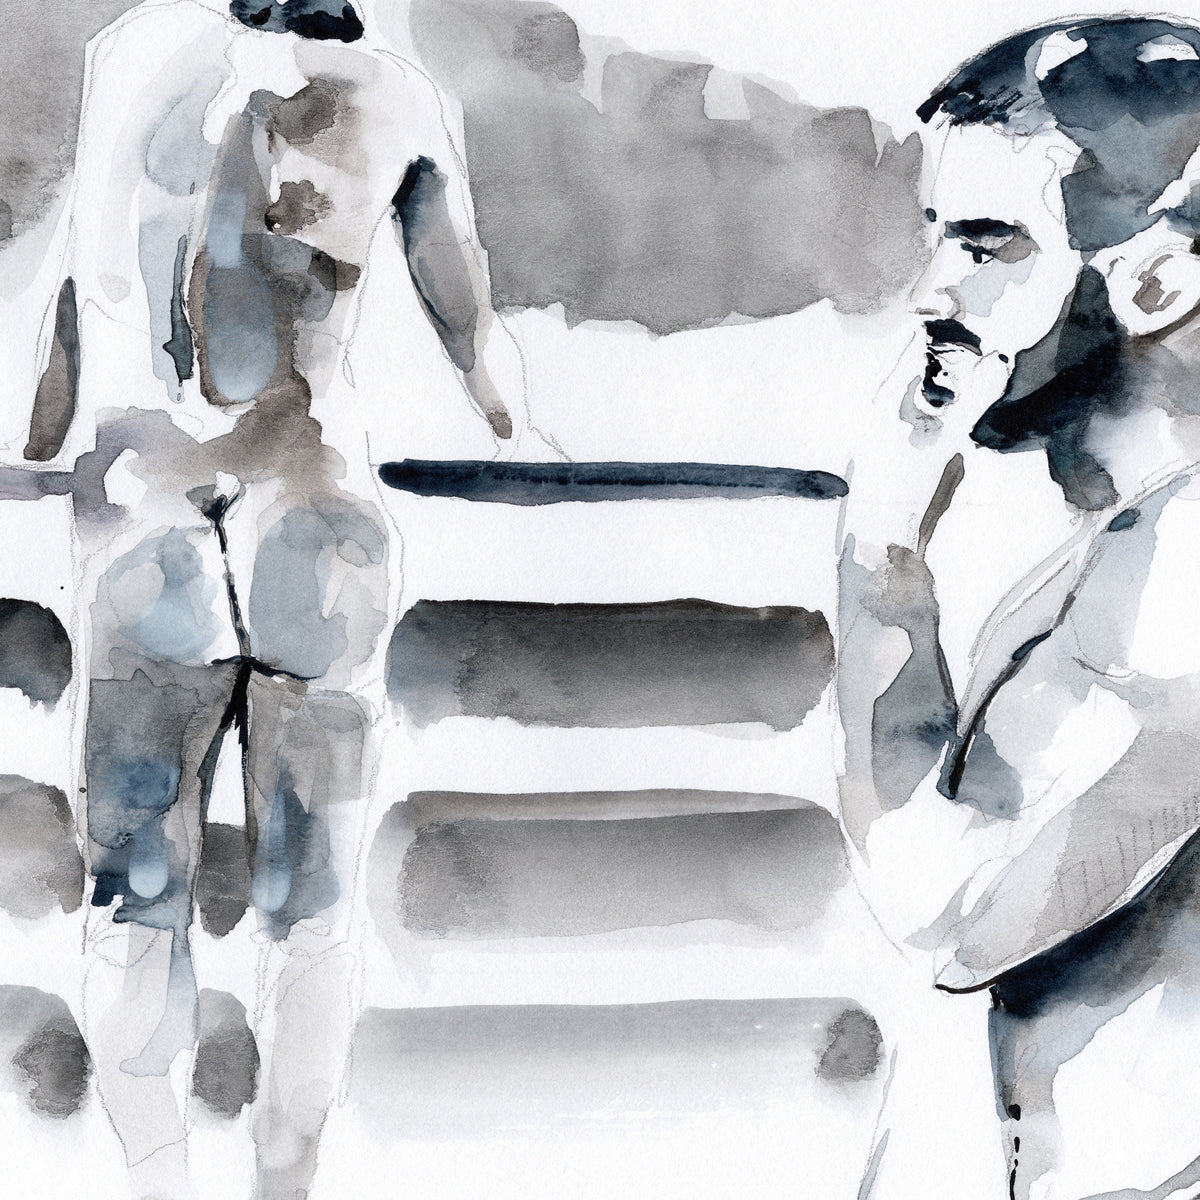 Two Male Figures, Muscular Seated Man and Standing Figure with Defined Buttocks - 9x12" Original Watercolor Painting